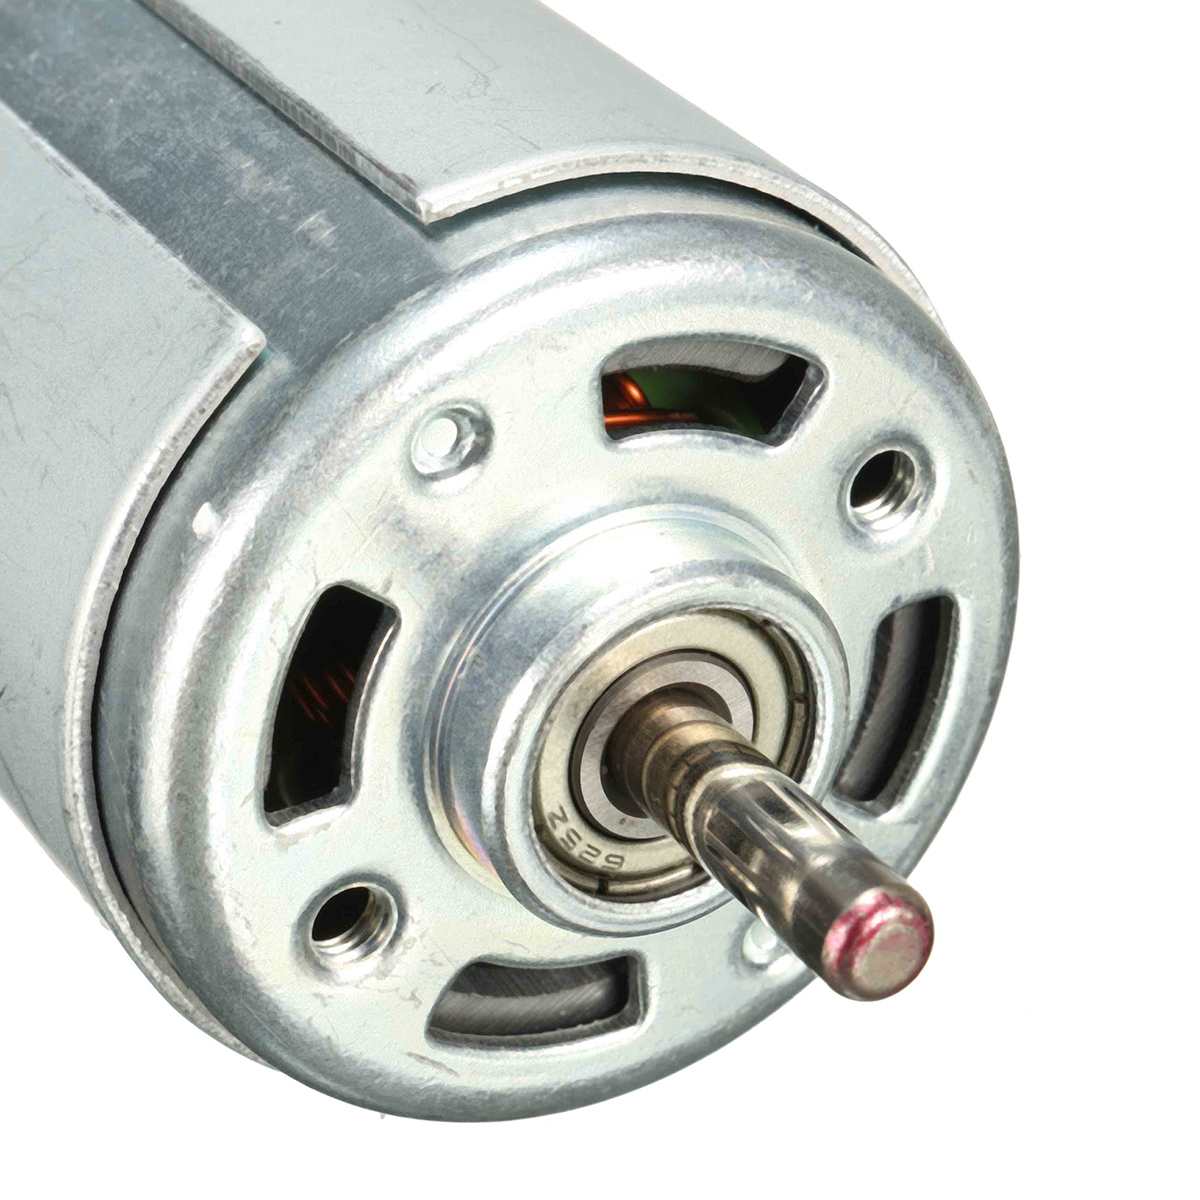 775 Motor Micro DC Motor DC 12V 13000RPM Ball Bearing Large Torque High Power Low Noise Electronic Component Motor 5mm Shaft Hot